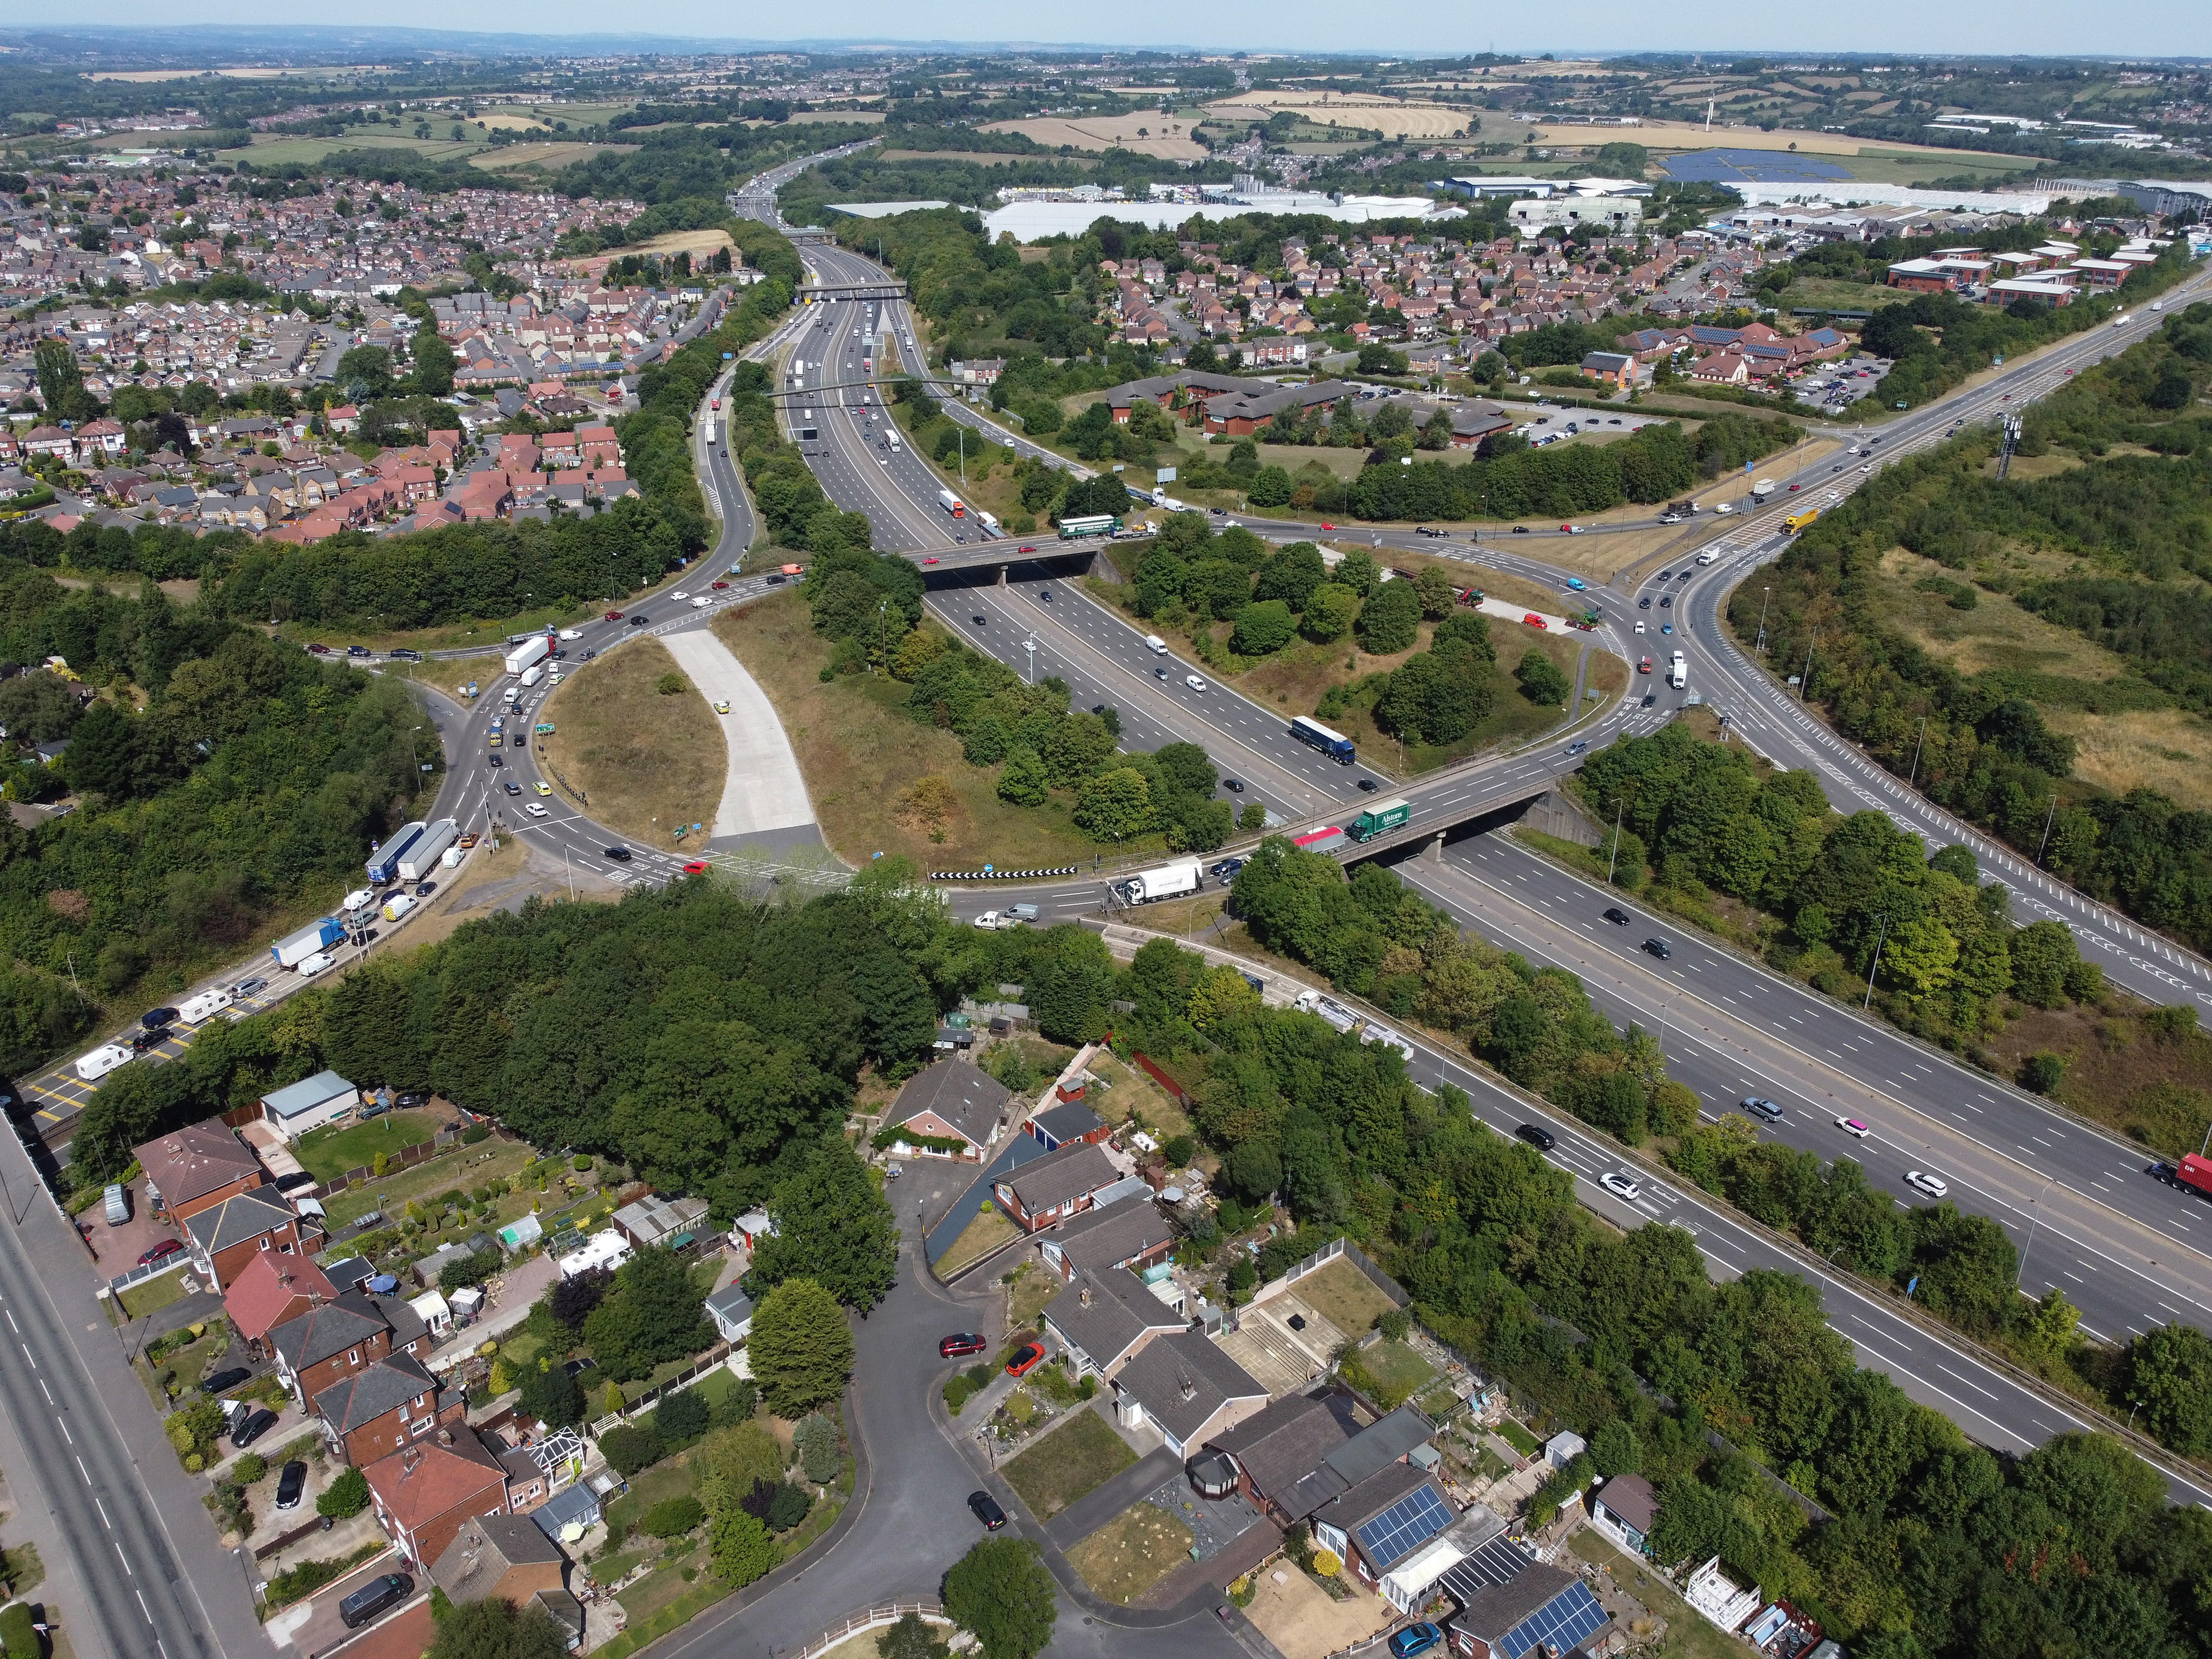 Delays at Junction 28 of the M1 is costing over 1000 hours and over £4 million to economy